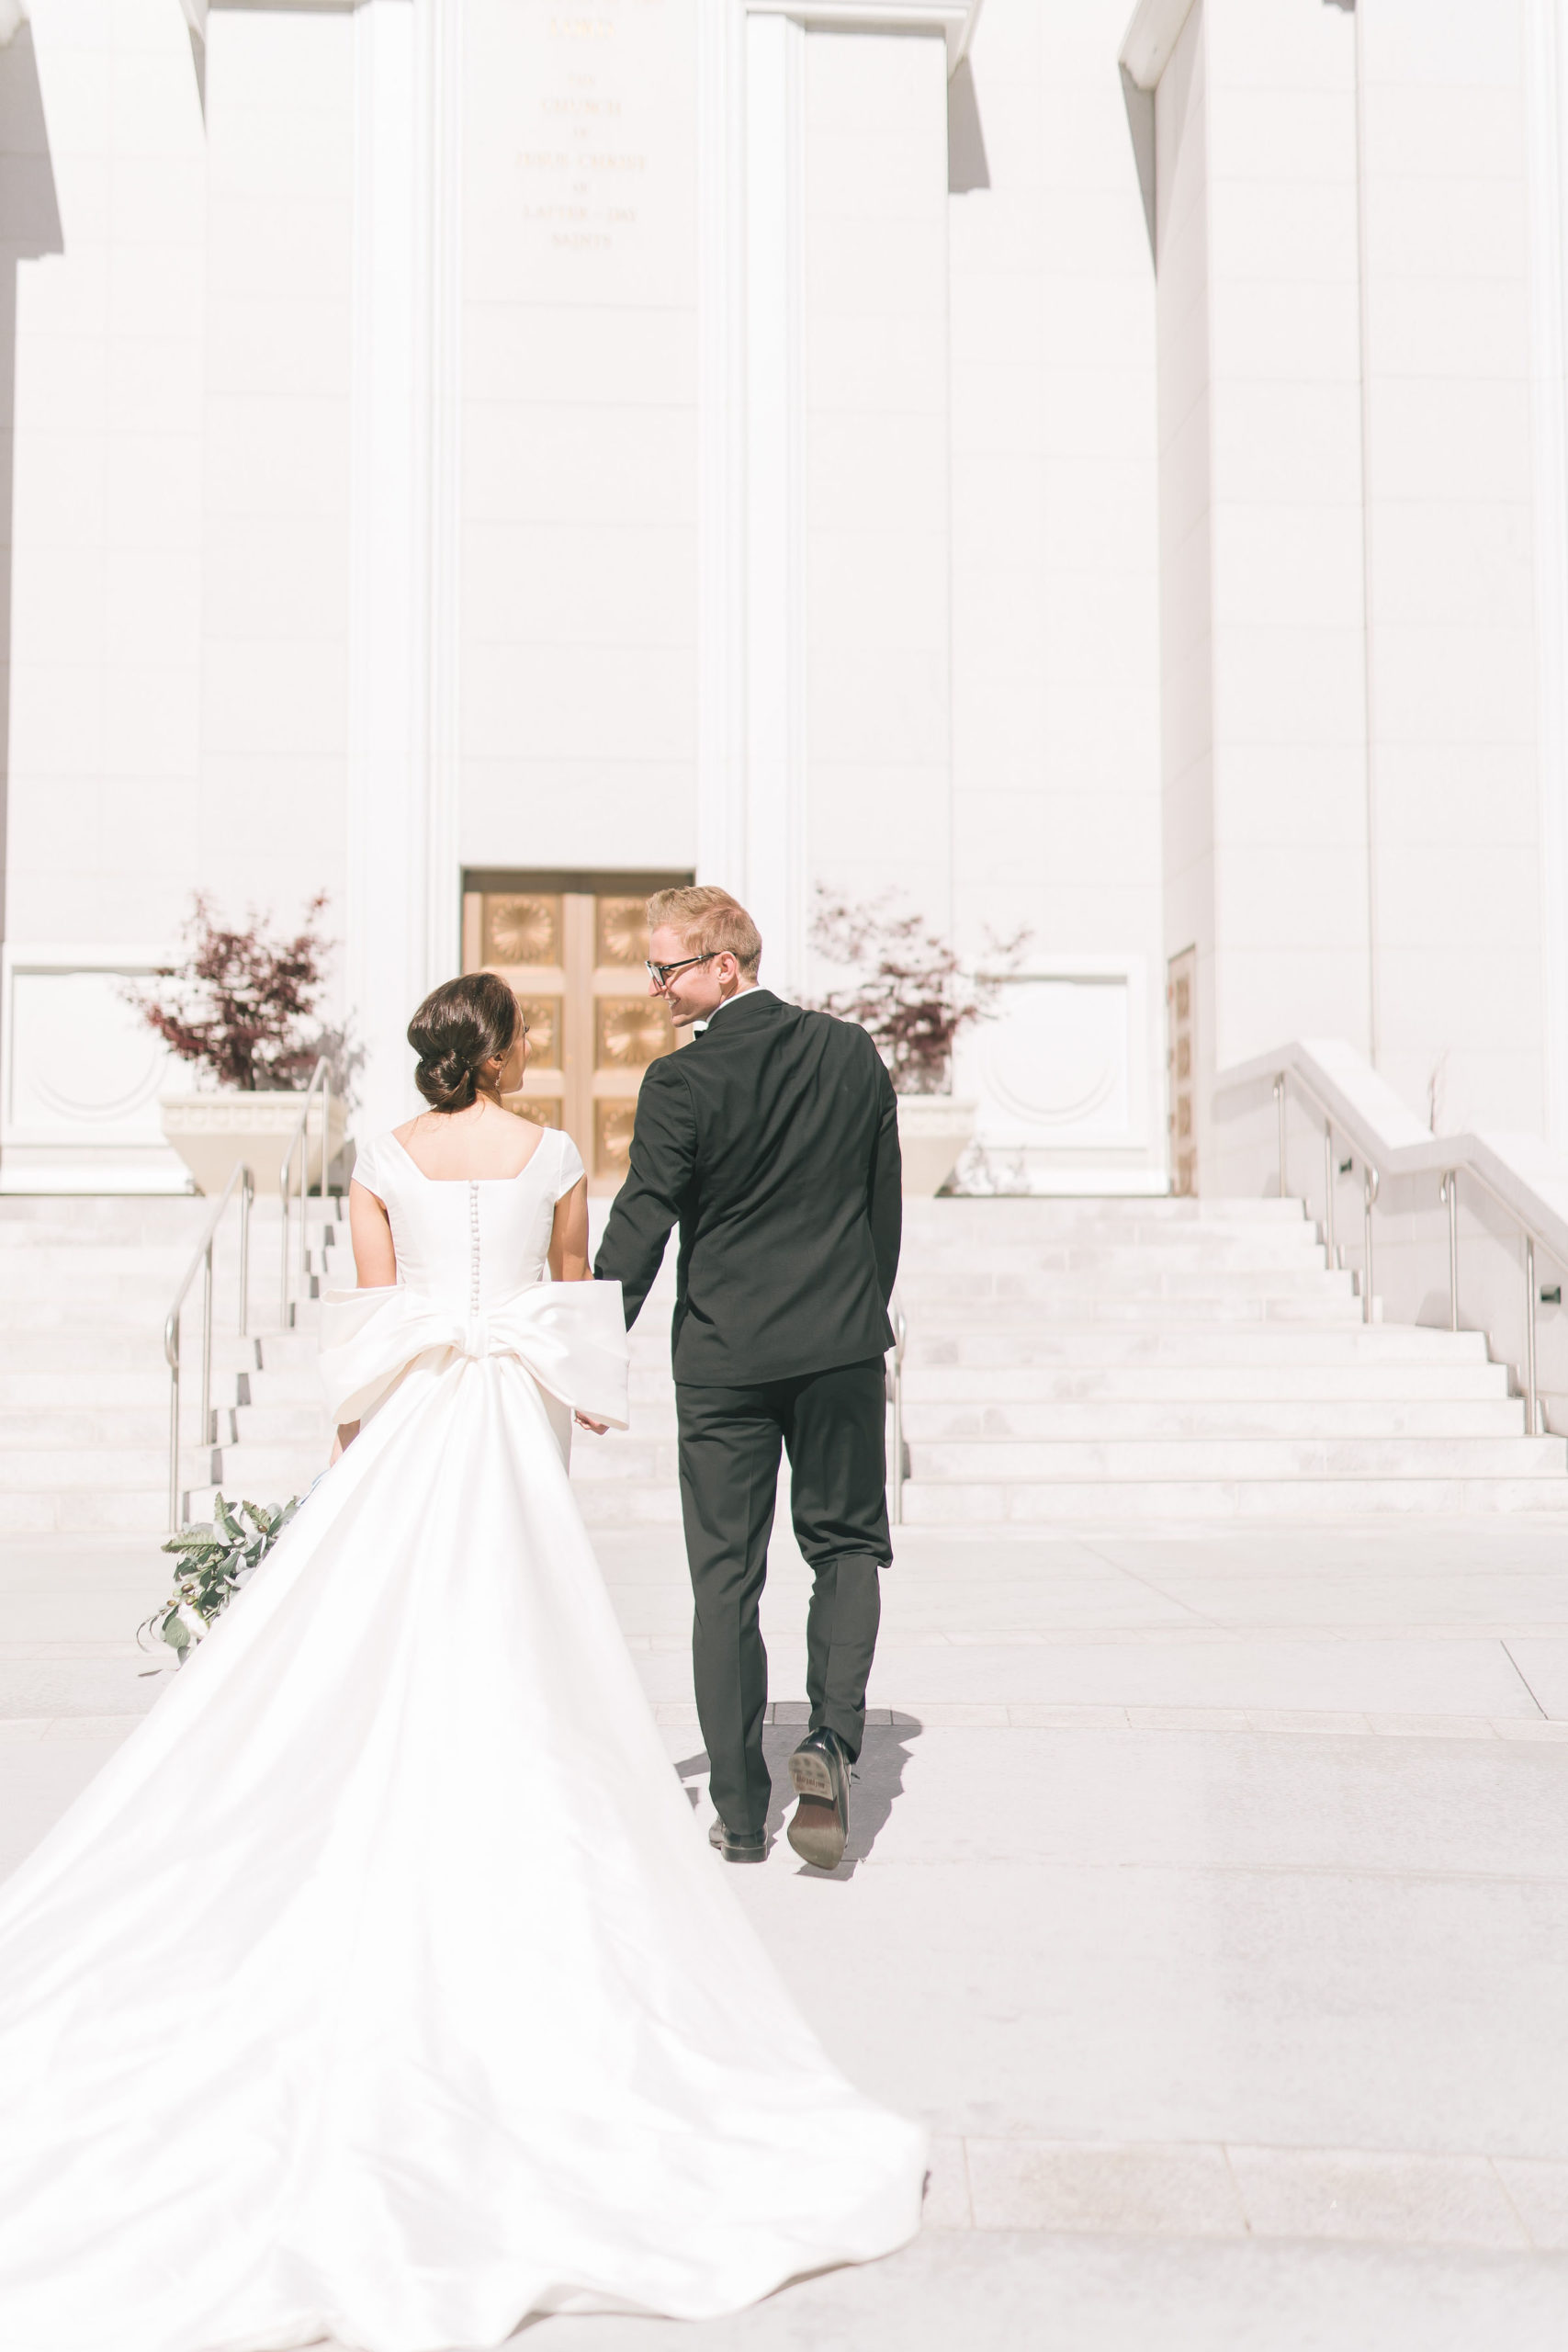 Wedding Photographers Sacramento captures Amalfi Coast Themed Wedding bright beautiful Italian wedding picture of bride holding hands with her towards an lds temple in Utah as they look to each other and smile